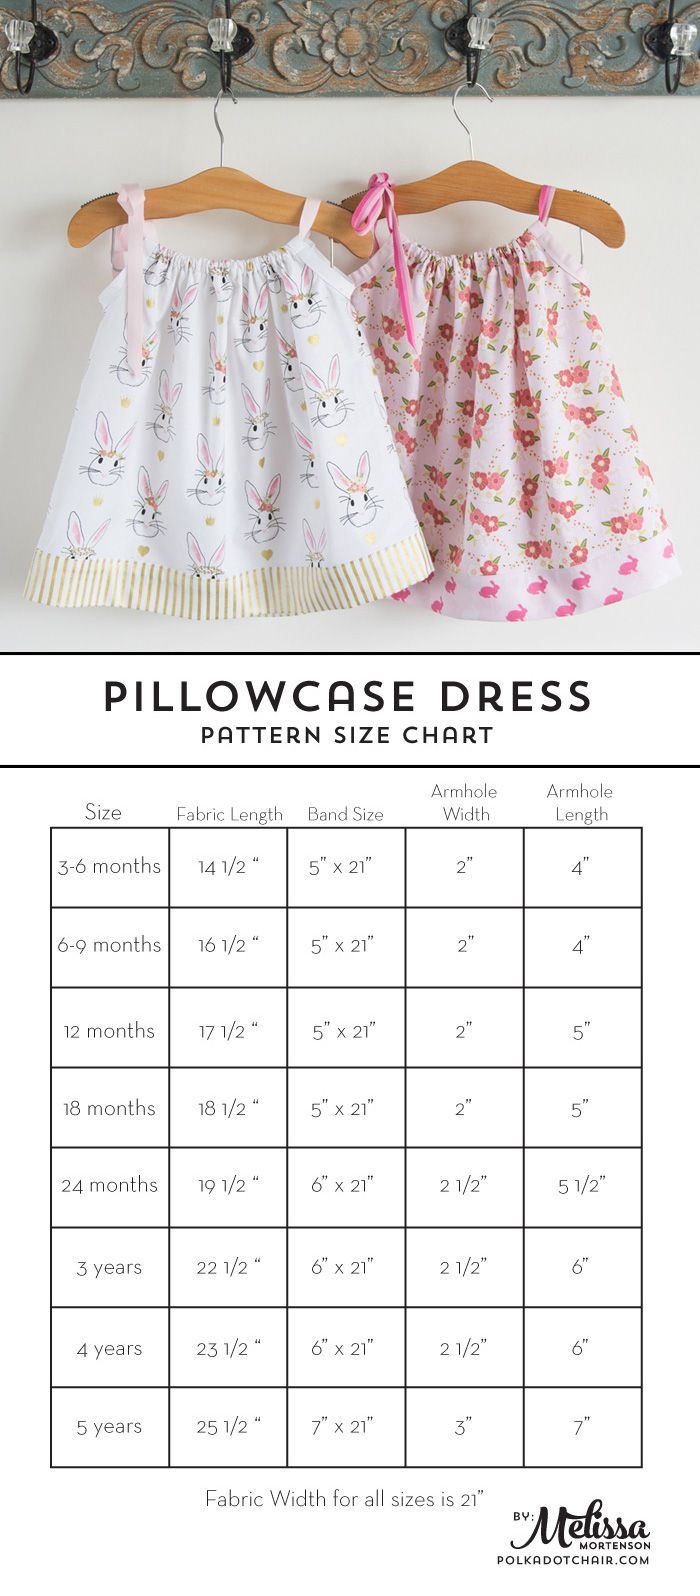 Learn how to sew a pillow case dress with this Pillowcase Dress Tutorial. Includes full instructions a